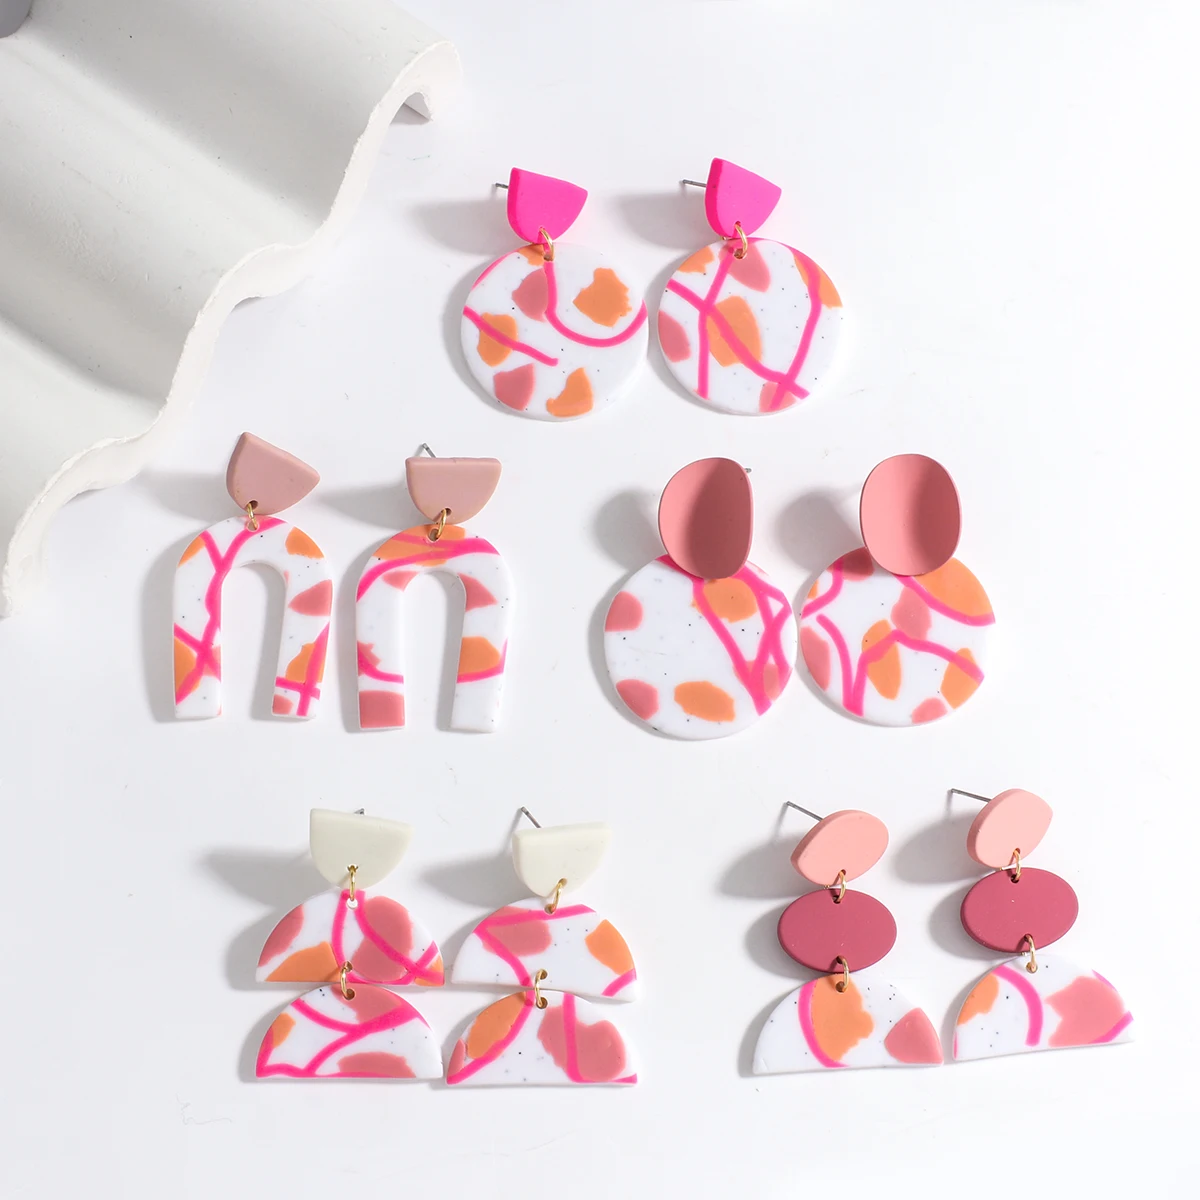 

AENSOA Unusual Pink Abstract Pattern Polymer Clay Earrings for Women Geometric Round Arched Drop Earrings Handmade Jewelry 2022